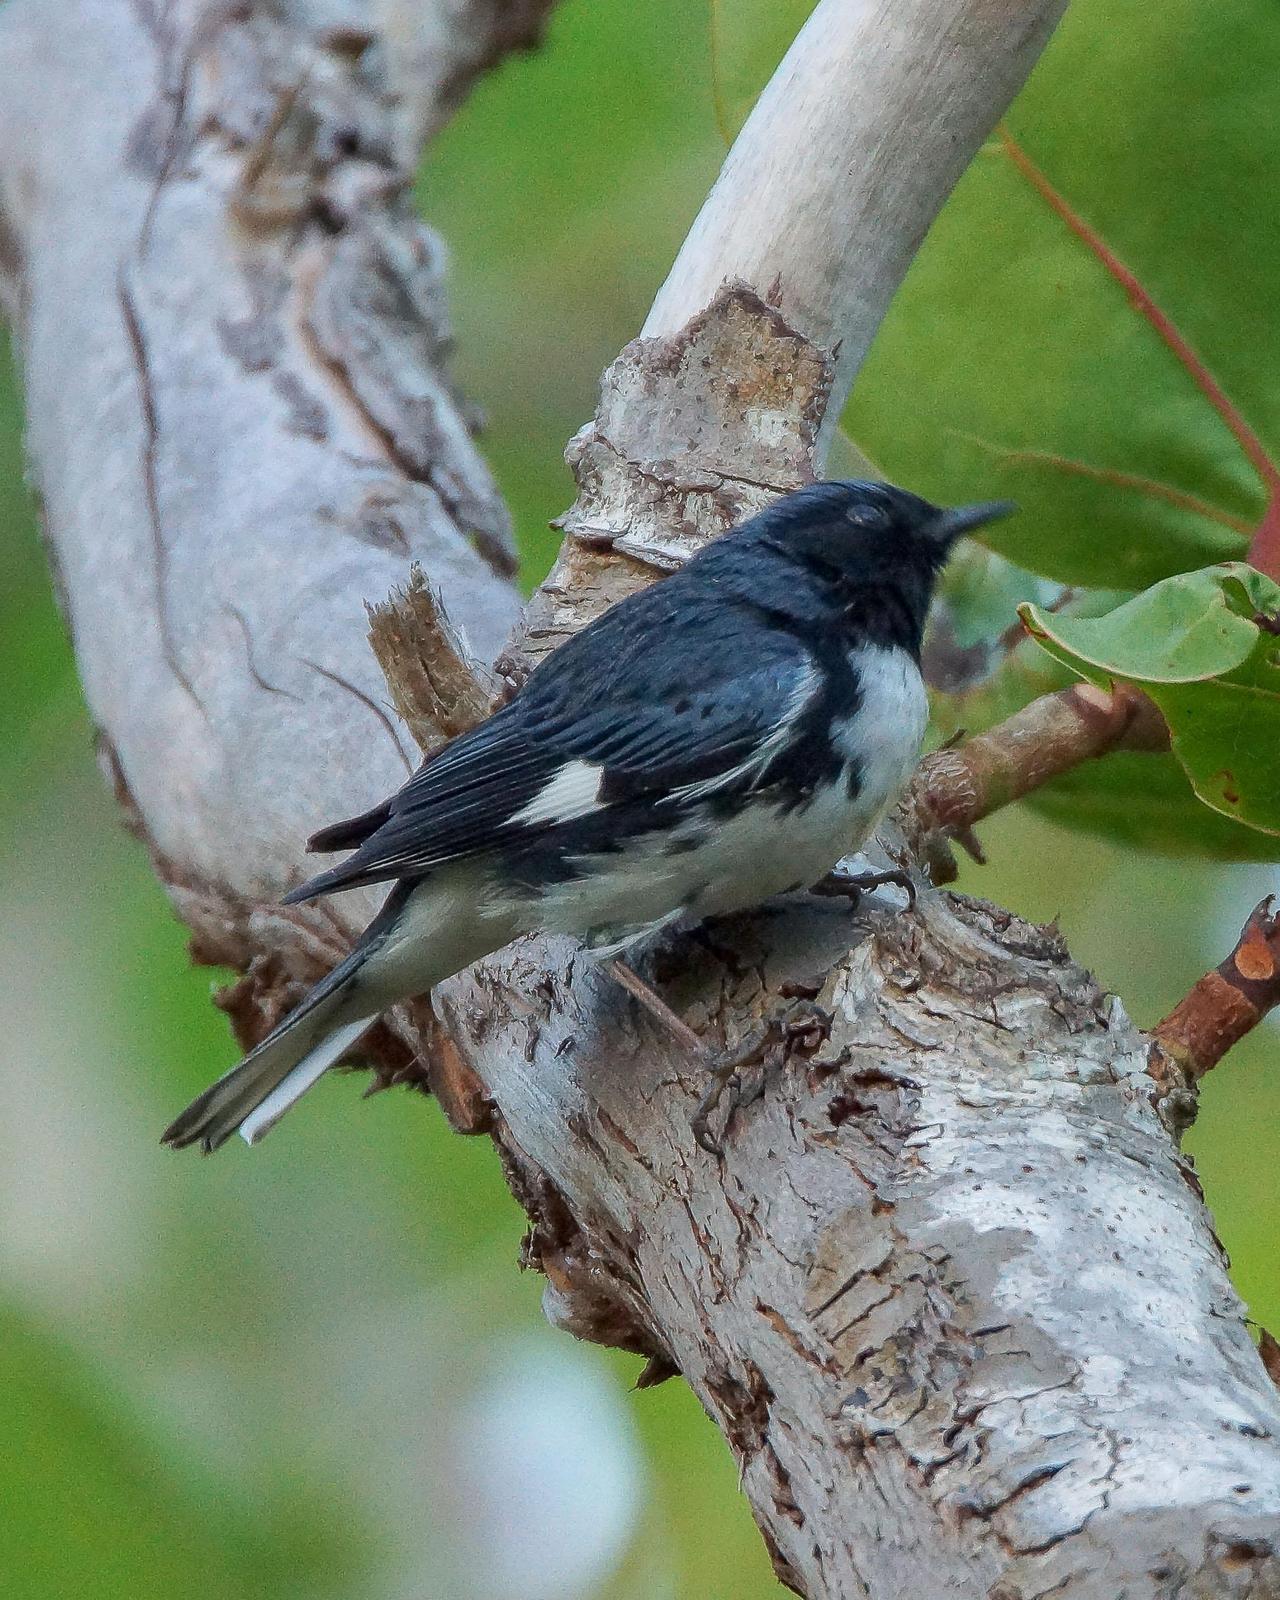 Black-throated Blue Warbler Photo by Steve Percival